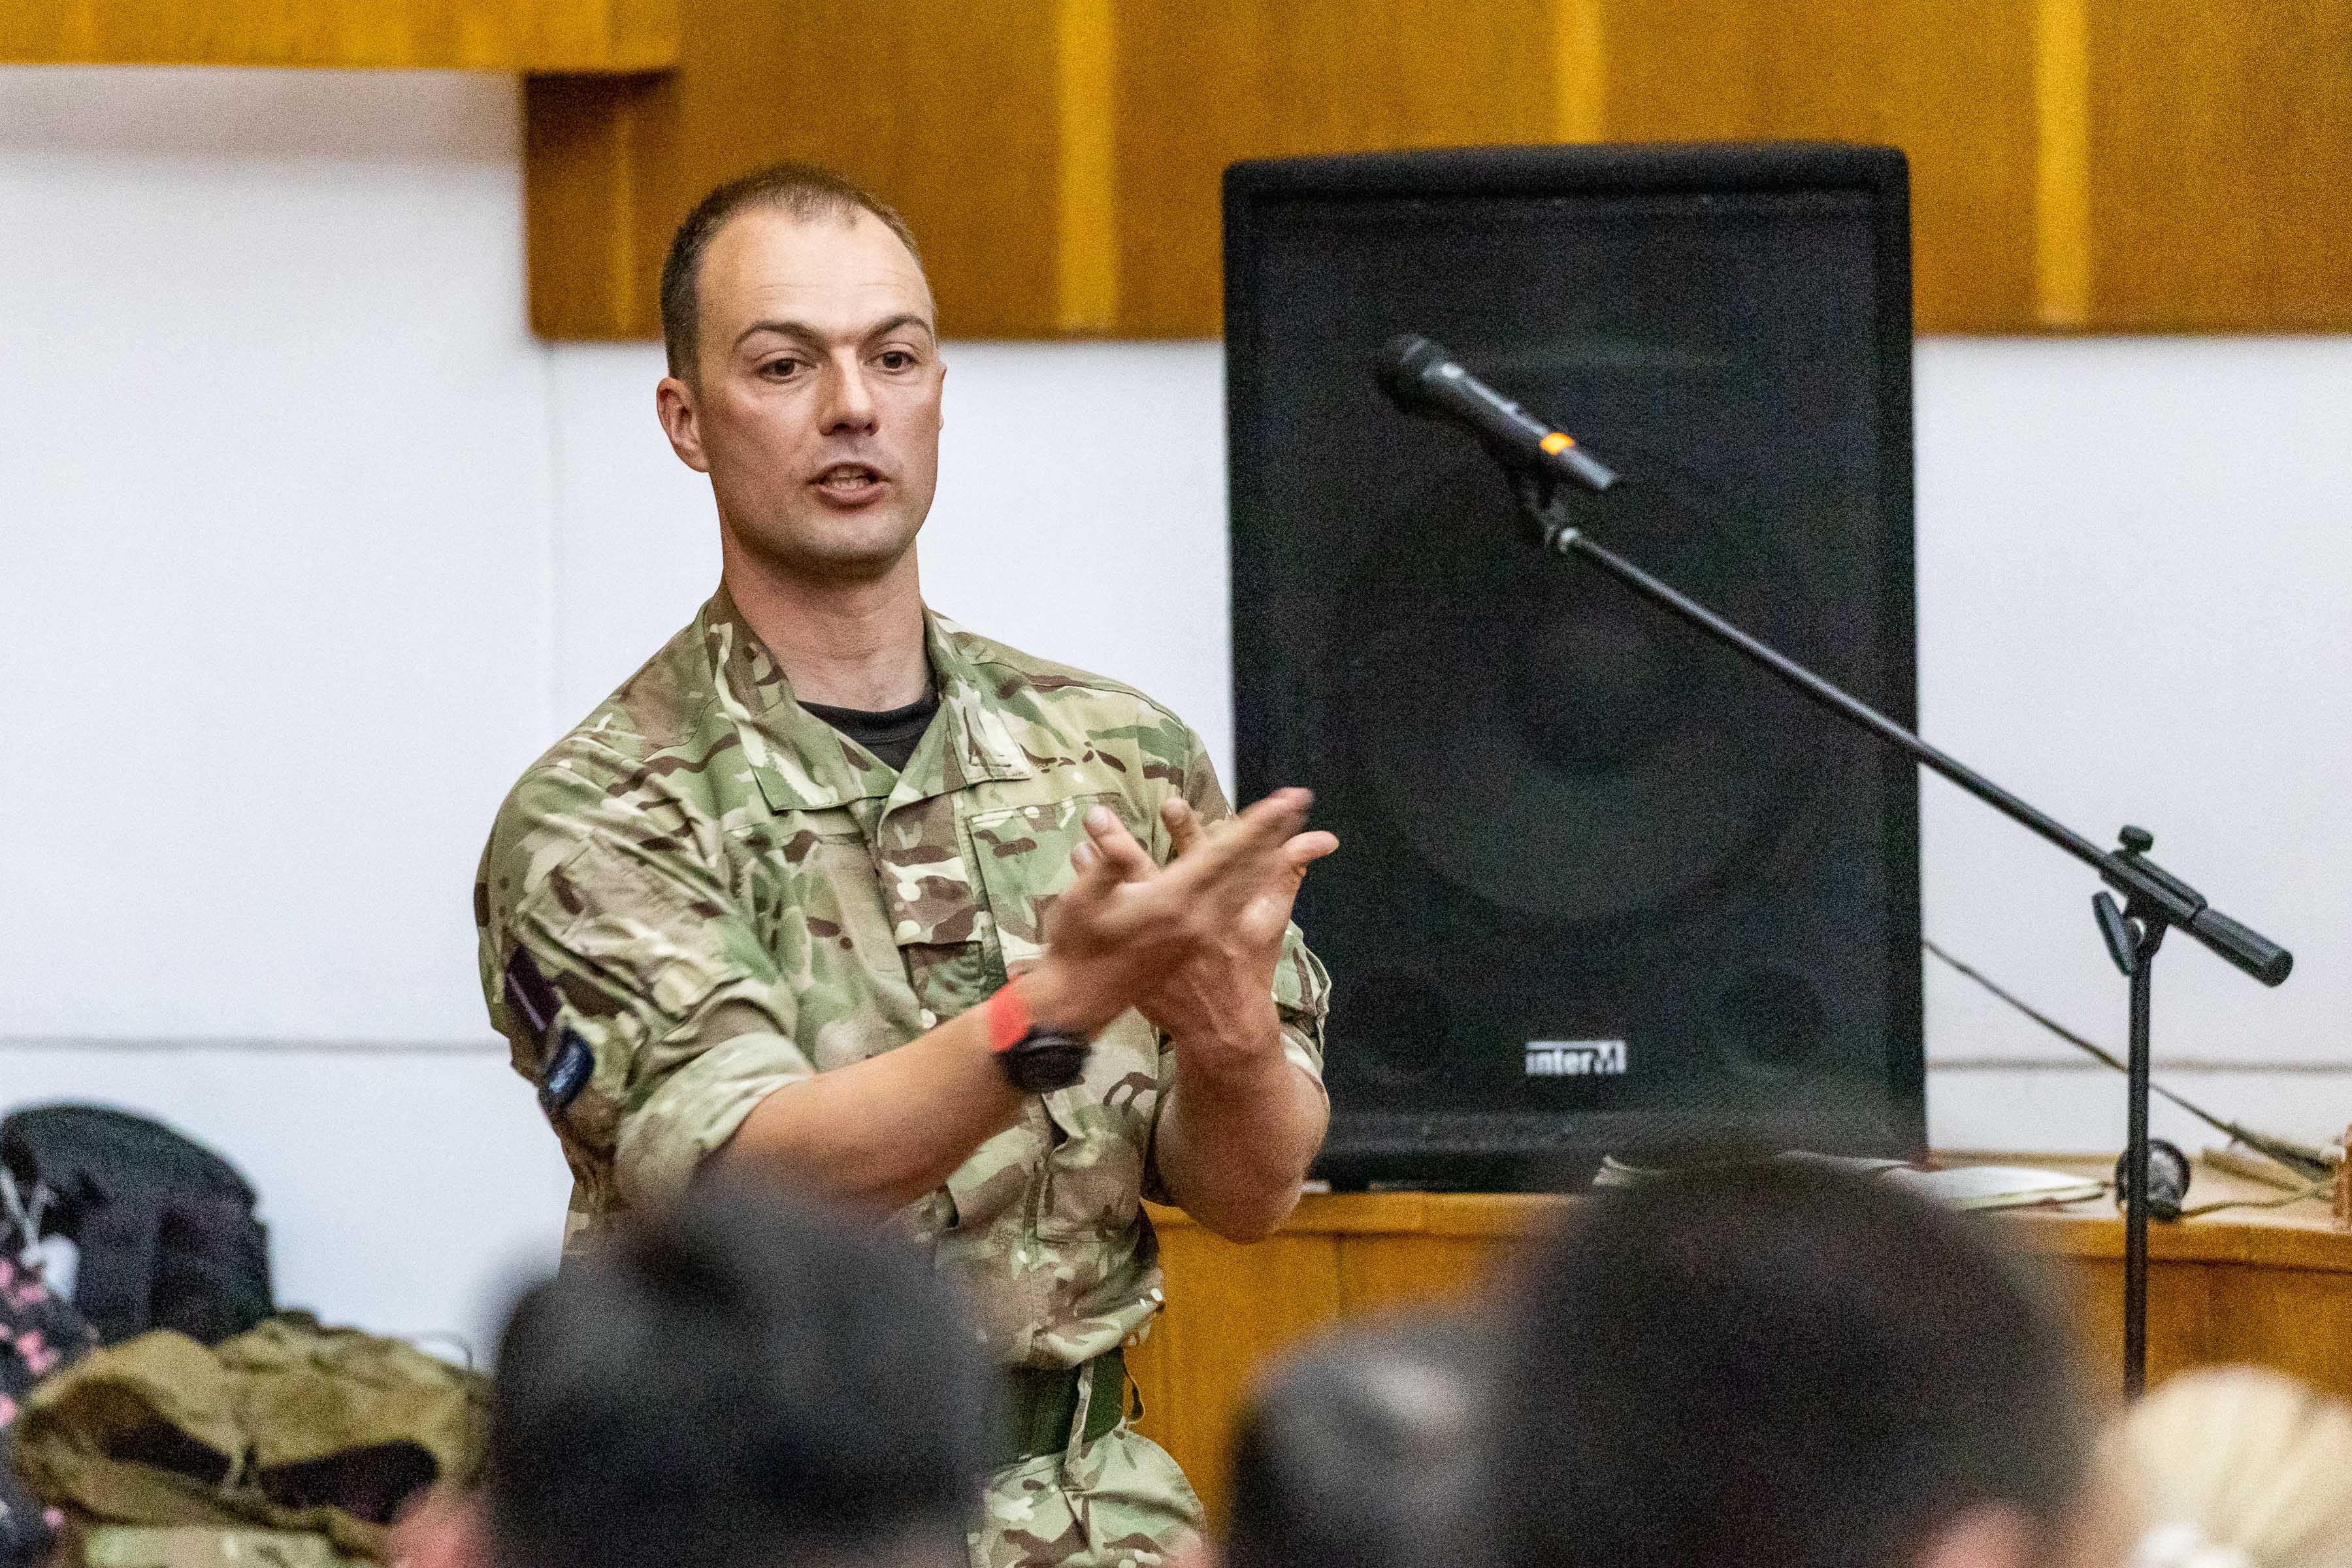 Personnel gives presentation, with microphone and speaker equipment.